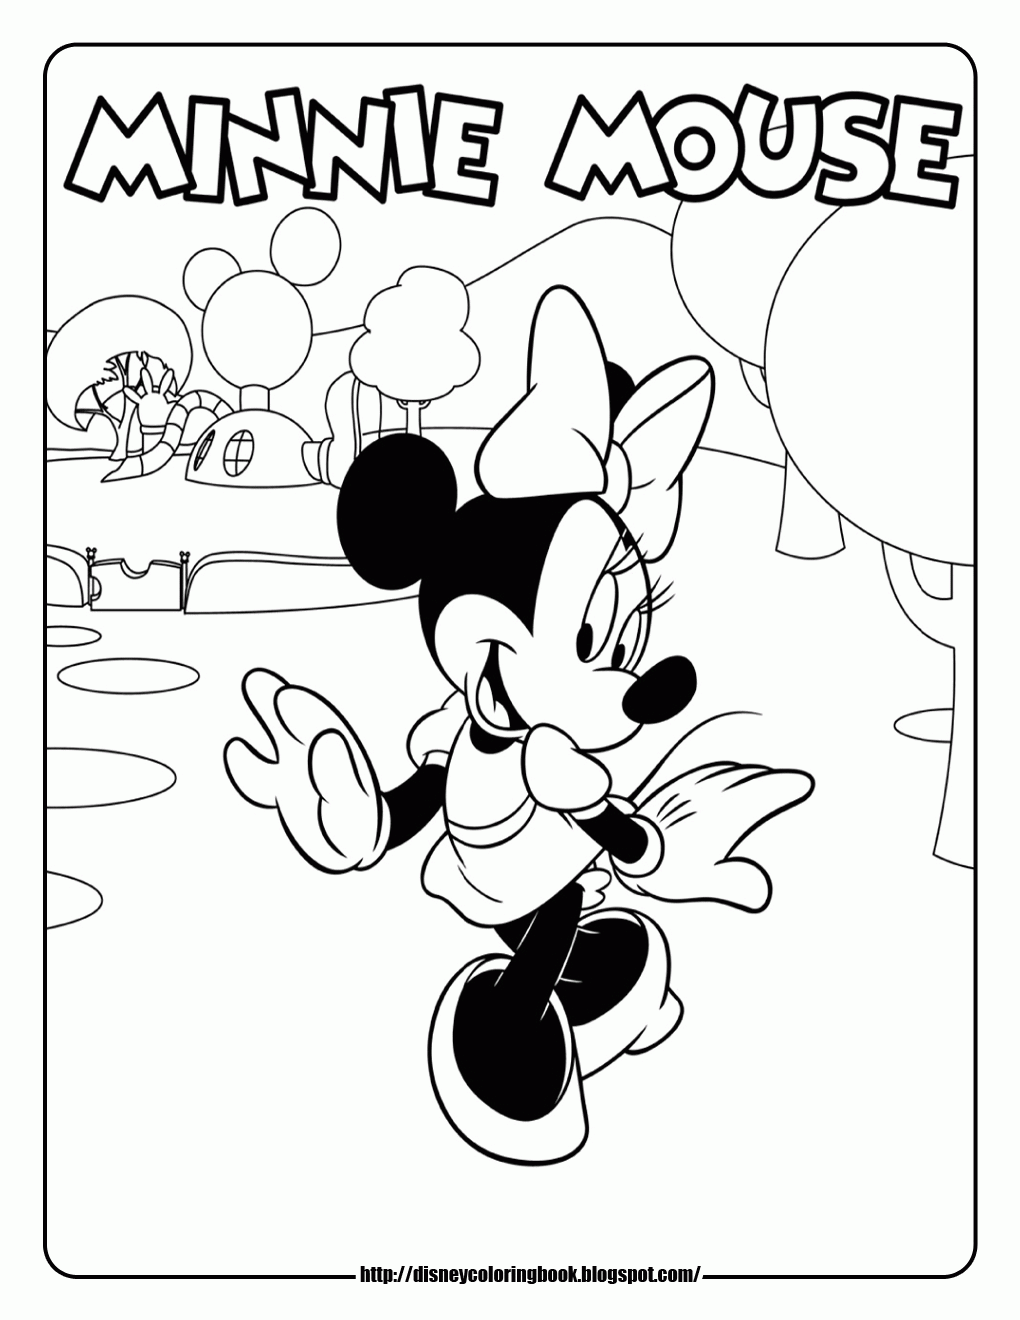 Mouse | Coloring pages wallpaper